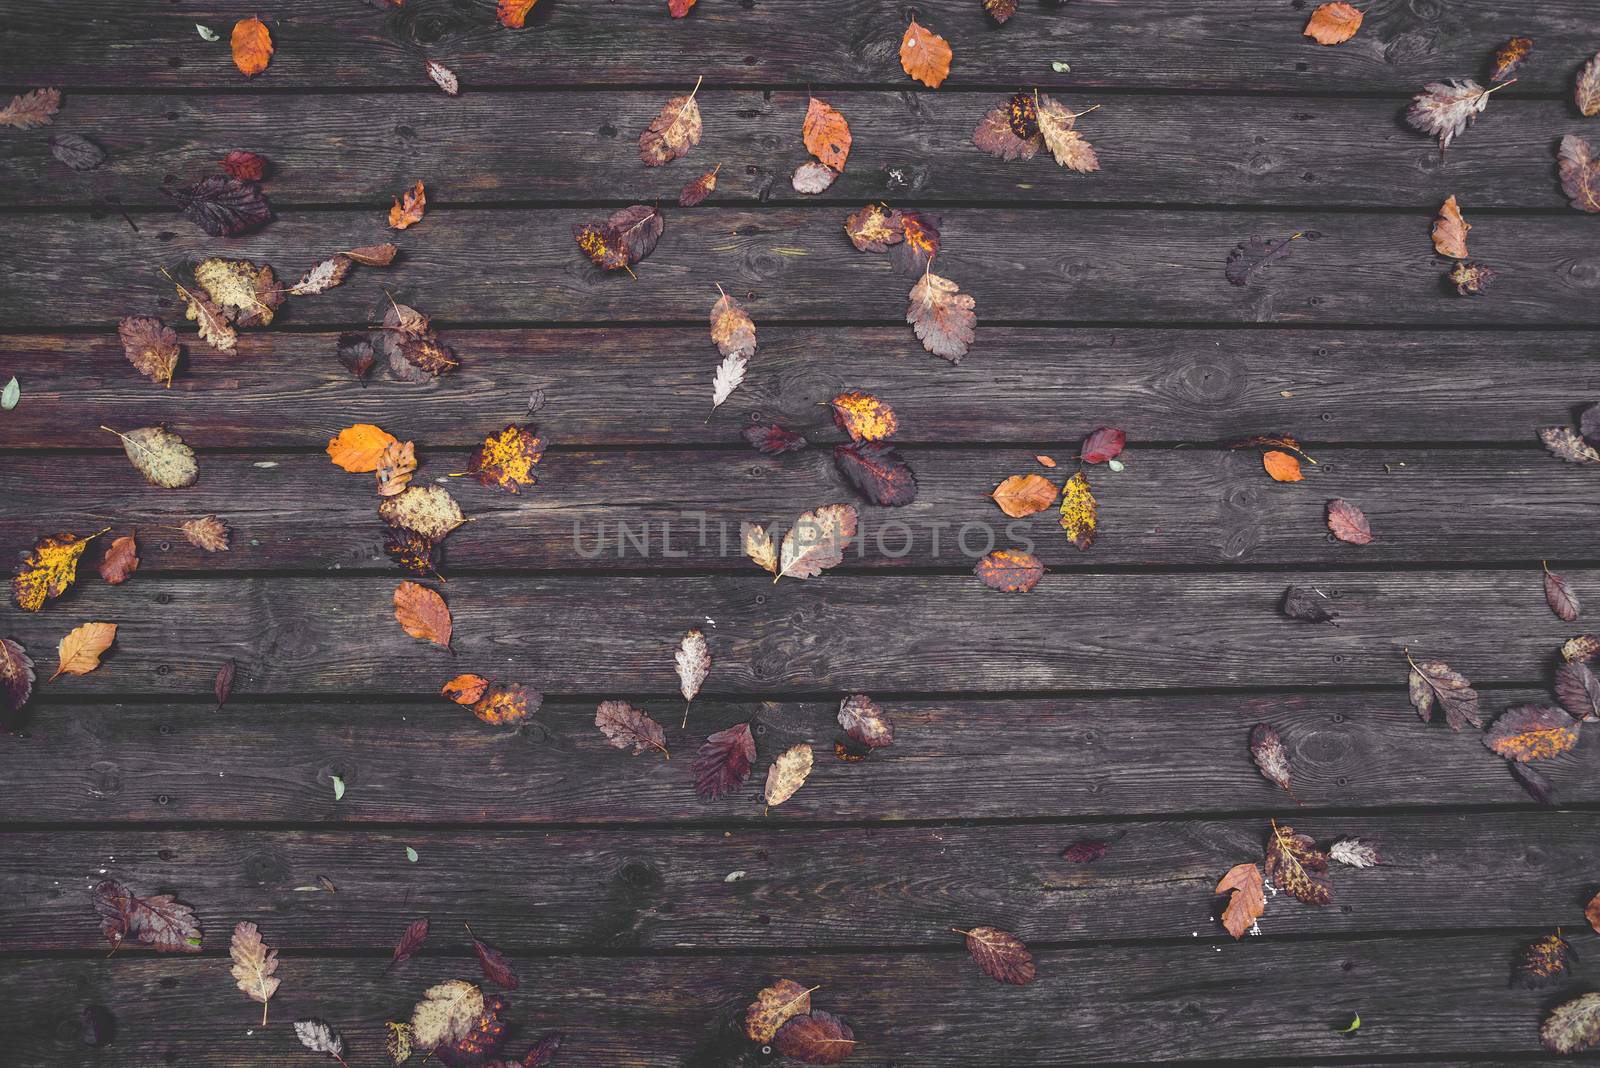 Autumn leaves on a wooden background by Sportactive